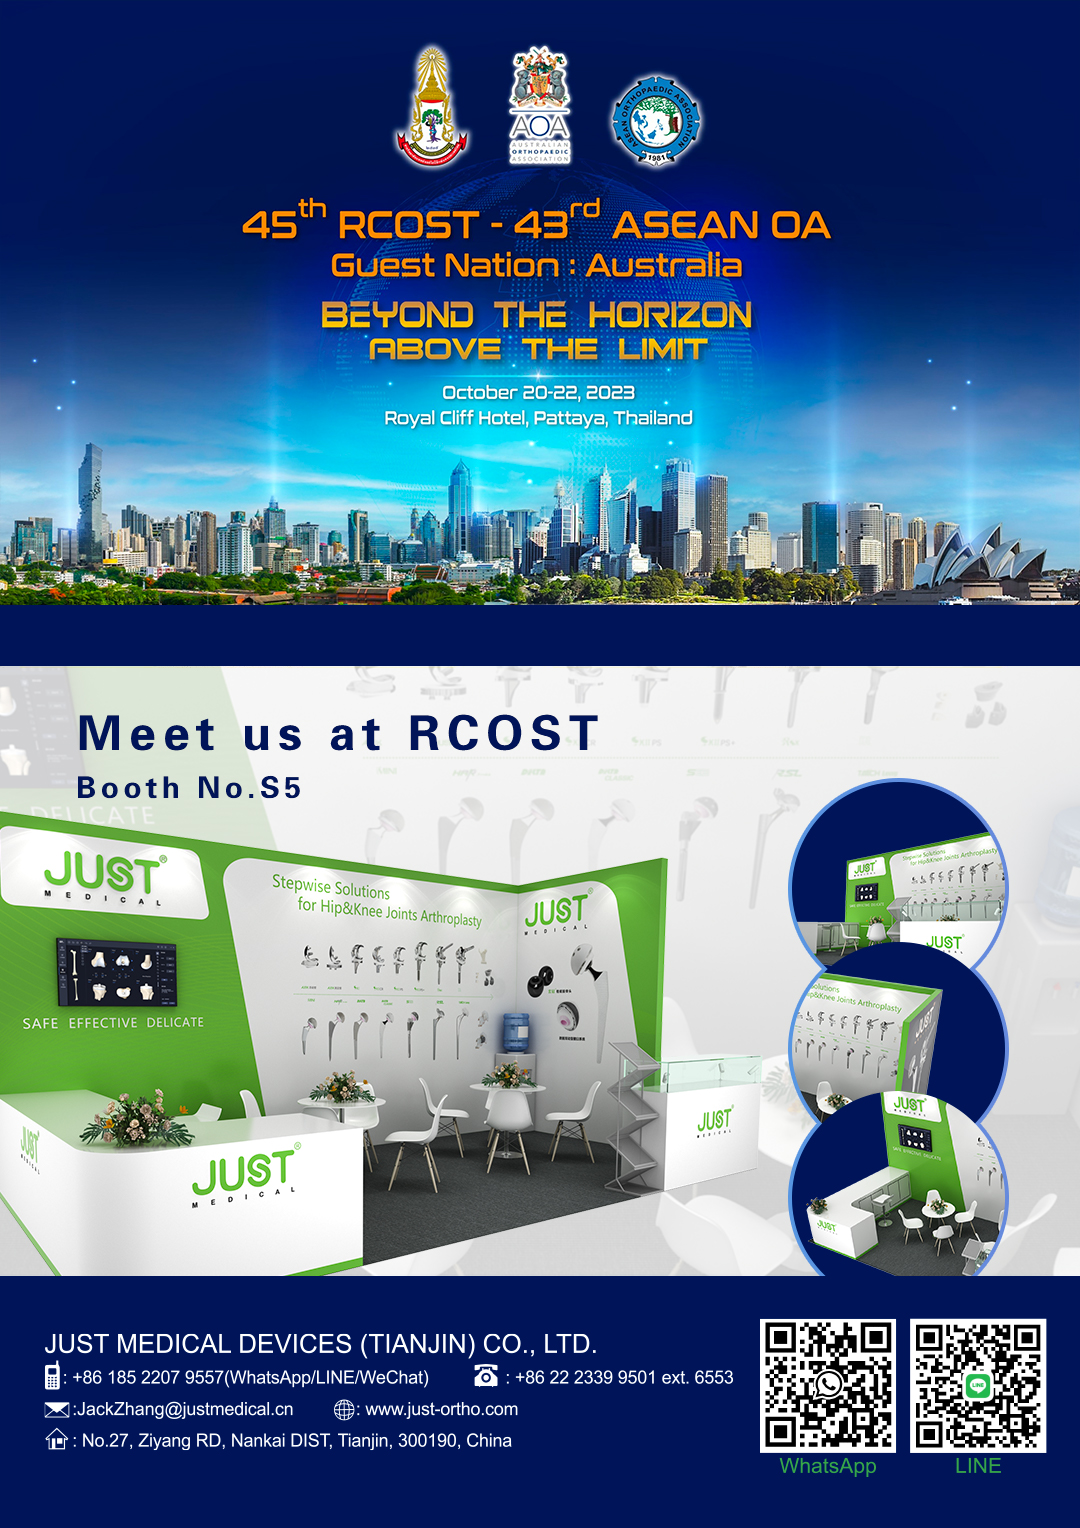 Exciting News! JUST Medical is thrilled to participate in the 45th RCOST Exhibition in Thailand!